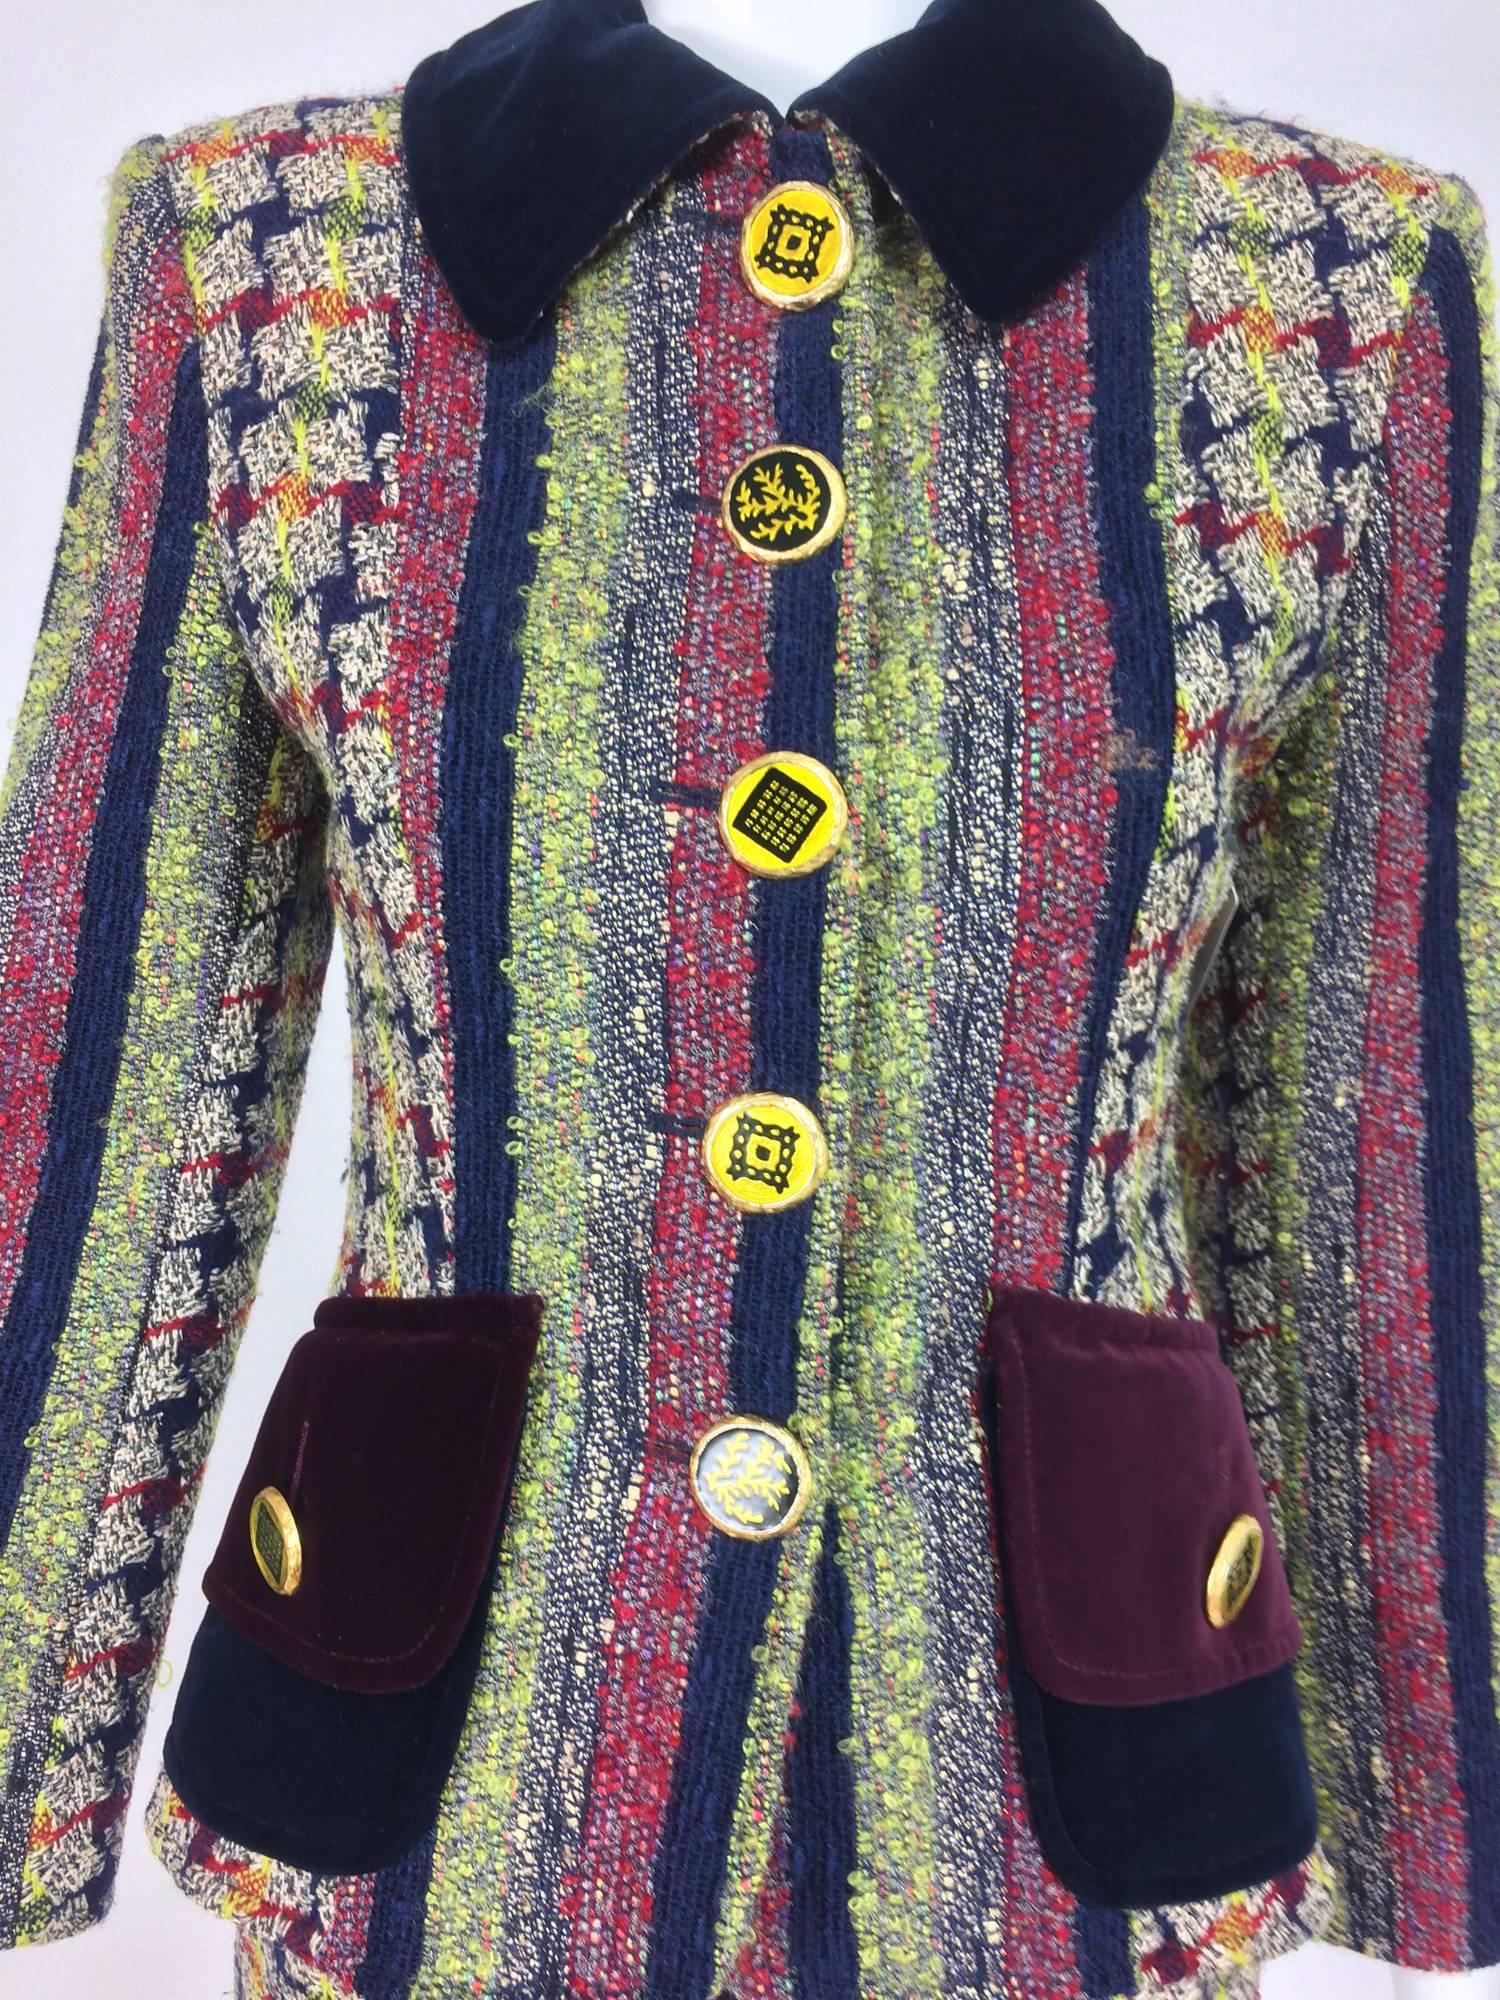 Christian LaCroix check and stripe, velvet trim skirt set 1990s...A mixture of textures in boucle, tweed and metallic weaves all in harmony as only Christian LaCroix could do...Fitted hip length, button front jacket, with velvet collar and flapped